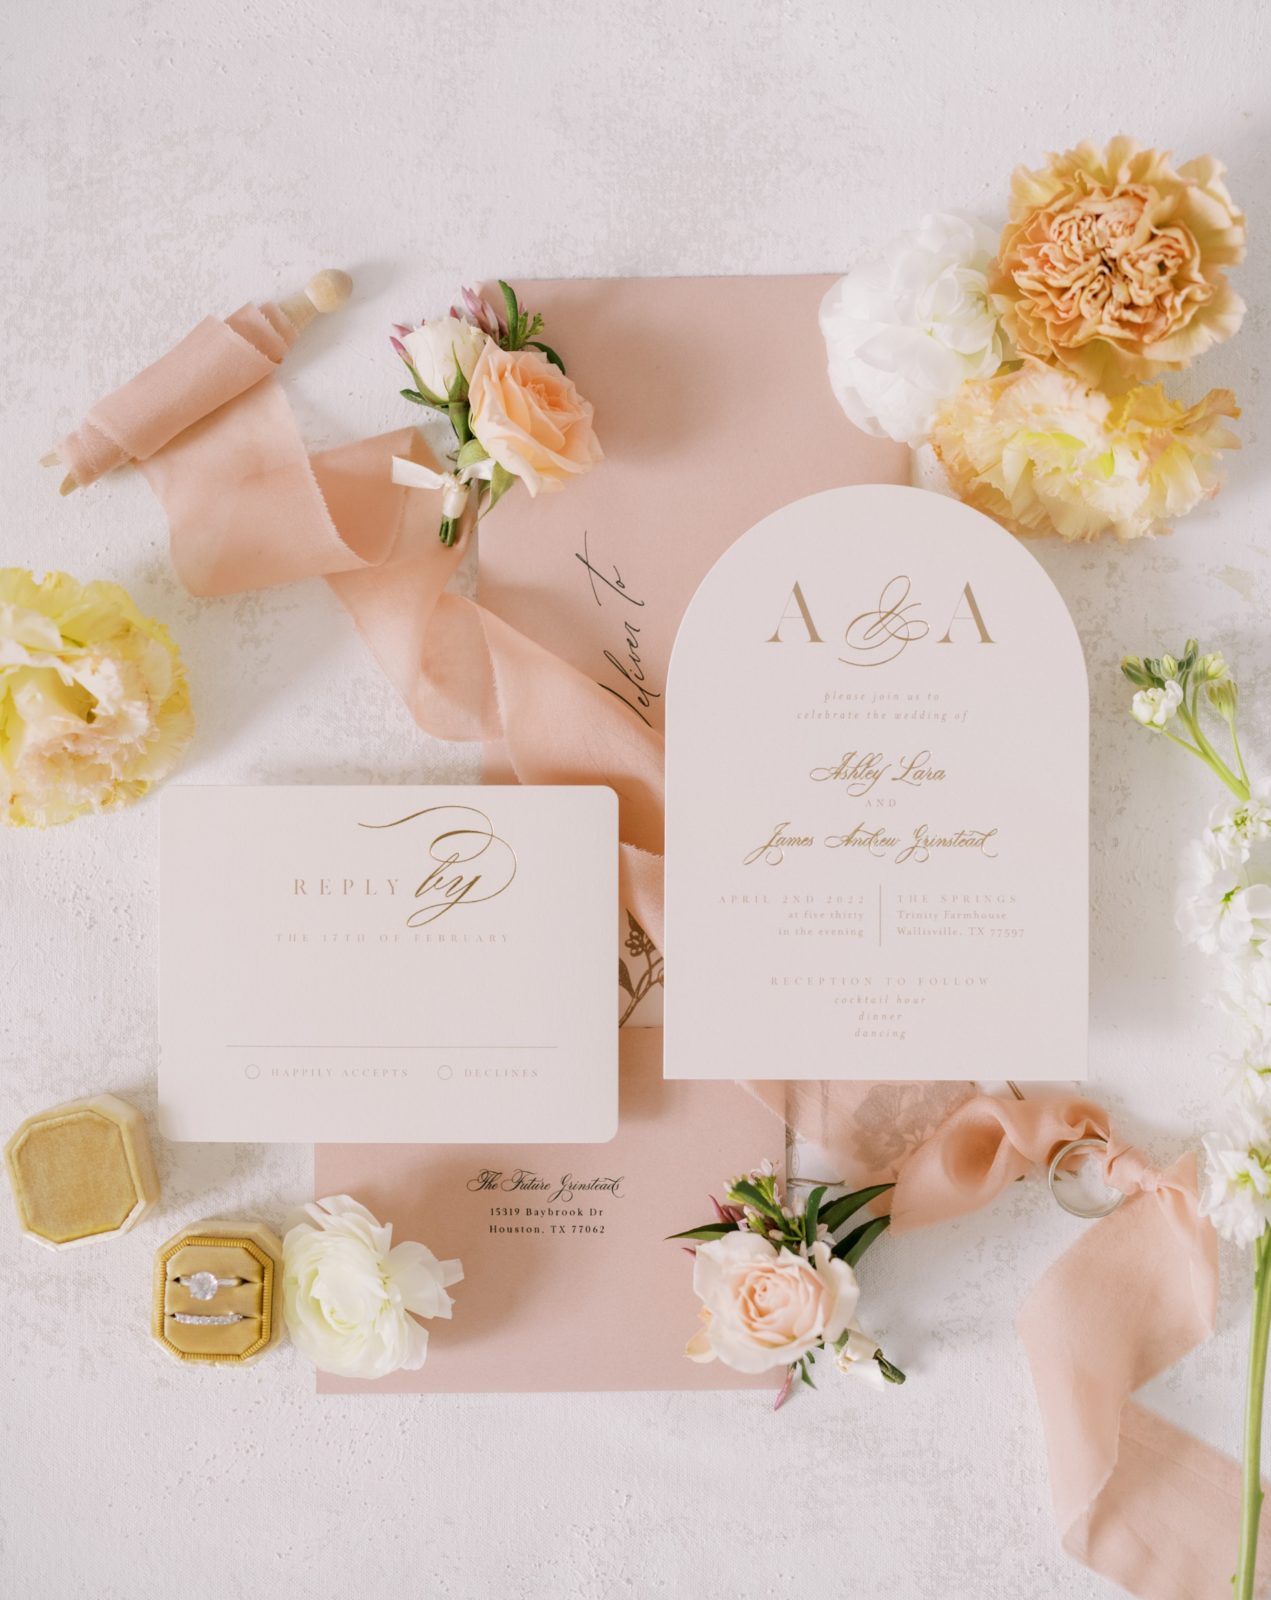 Flat lay of wedding invitation and weddign rings by Christina Elliott Photography. pink wedding announcements yellow ring box #ChristinaElliottPhotography #ChristinaElliottWeddings #Houstonweddings #TheSpringsVenue #EastHoustonweddings #Mrs #Mr